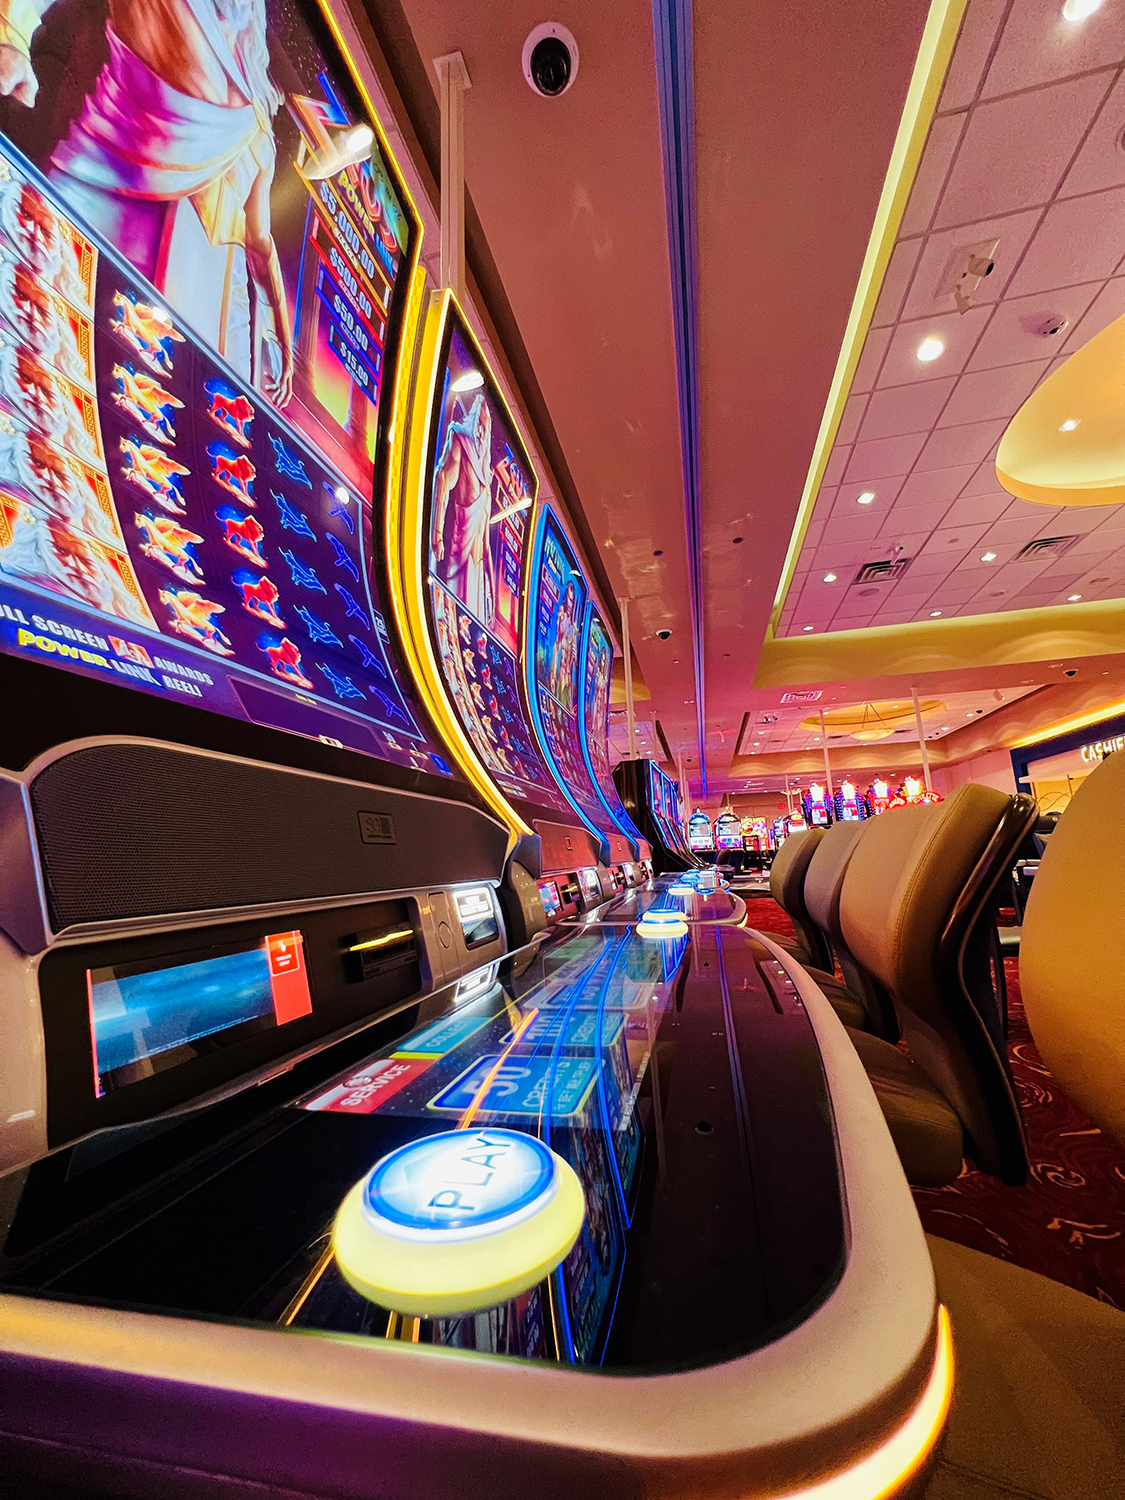 LEARN MORE ABOUT THE RANGE OF GAMES OFFERED AT ROCKFORD CASINO 1